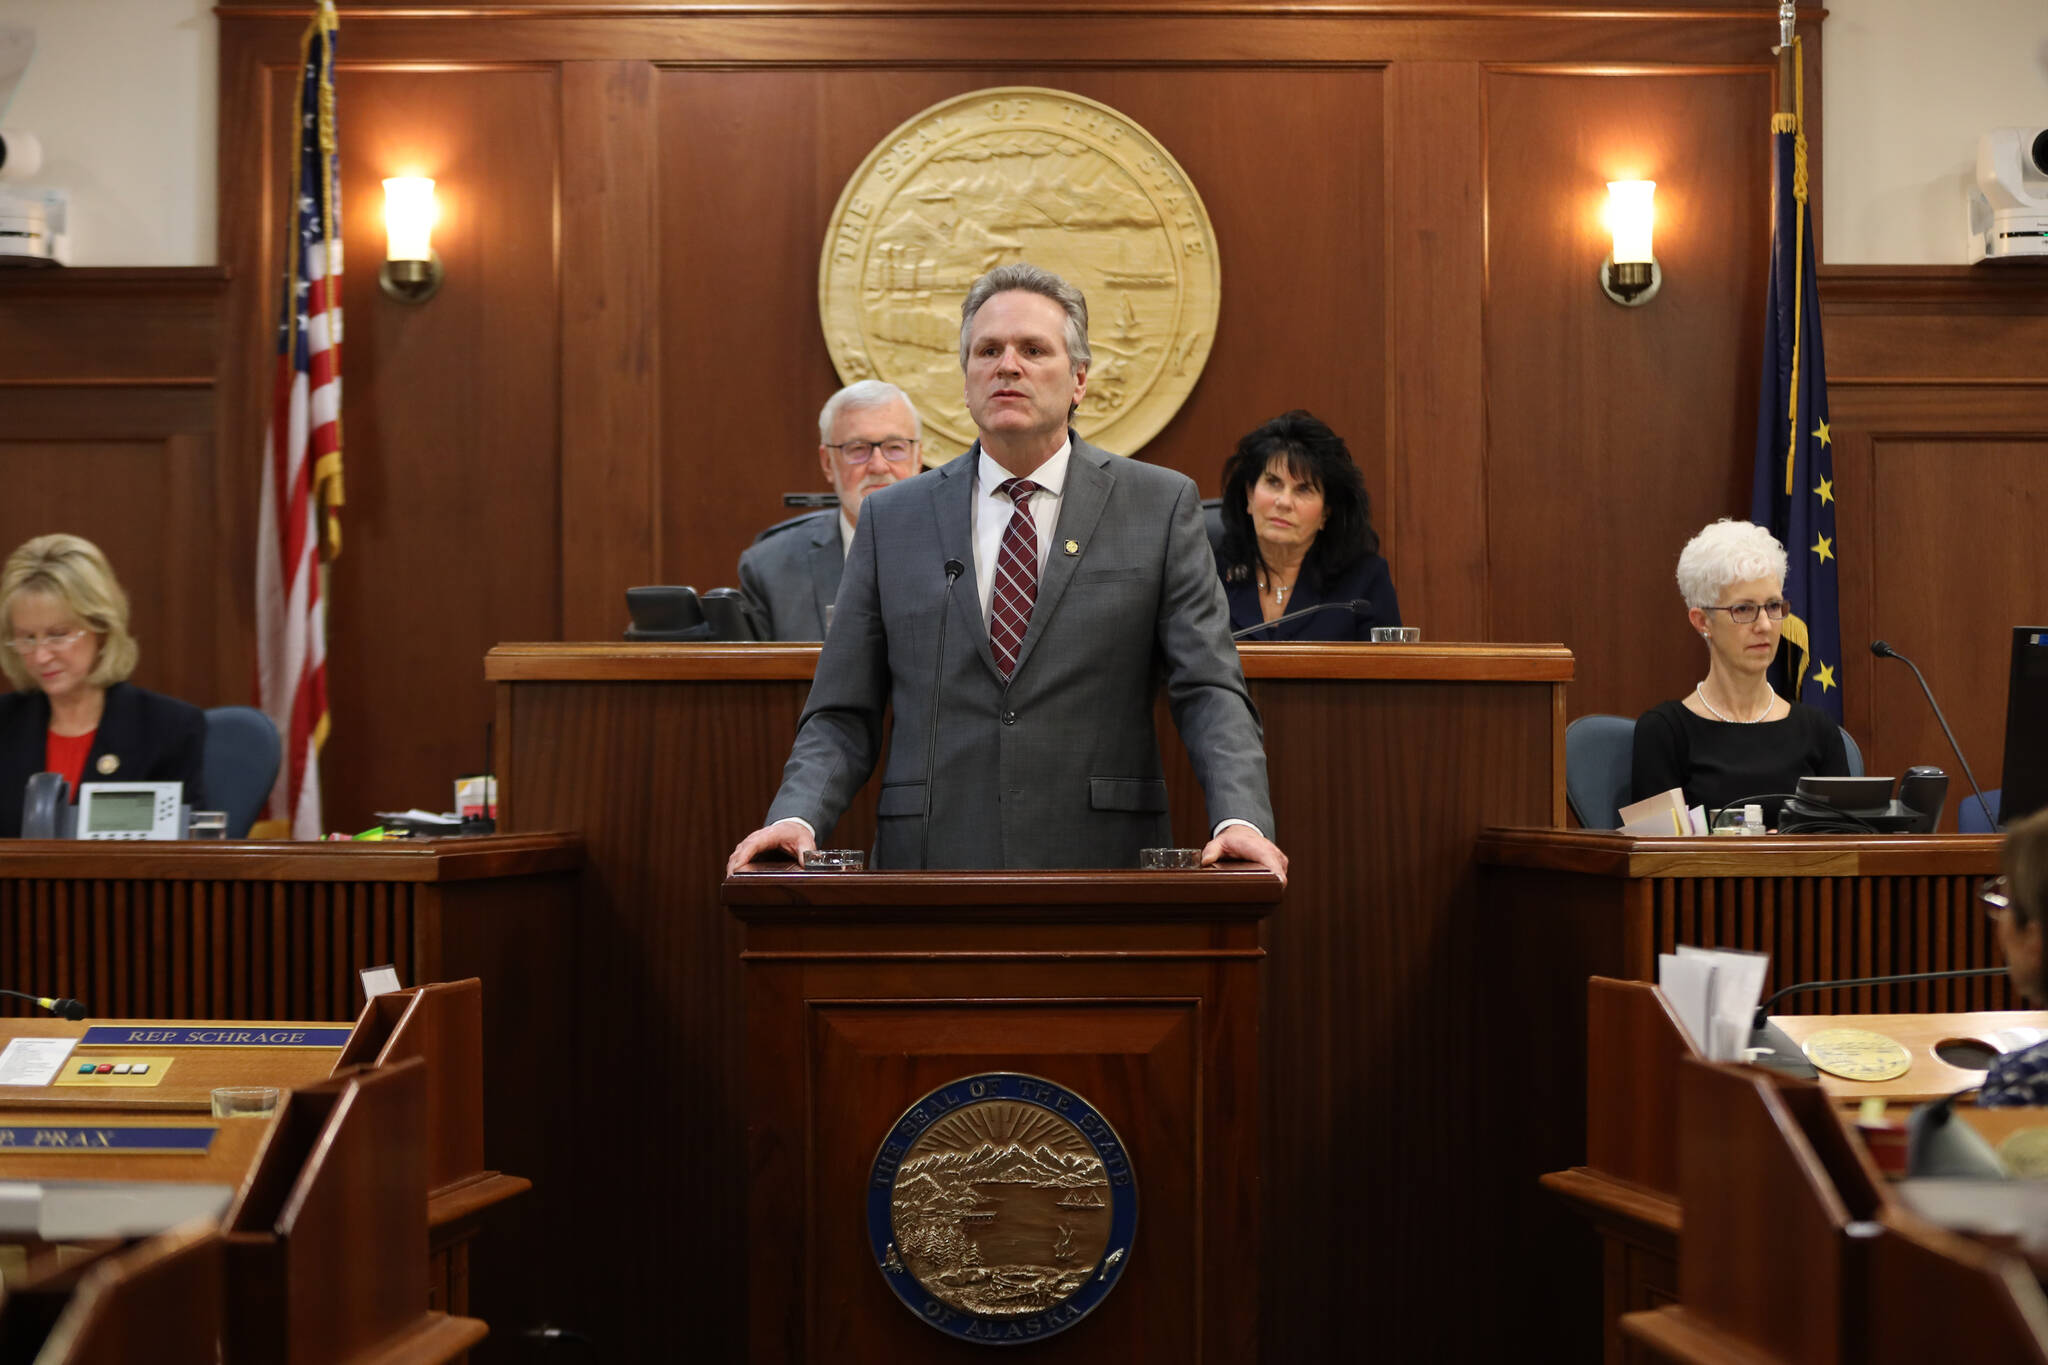 Gov. Mike Dunleavy gives his State of the State address at the Alaska State Capitol on Monday, Jan. 23, 2023, in Junuea, Alaska. (Clarise Larson/Juneau Empire)